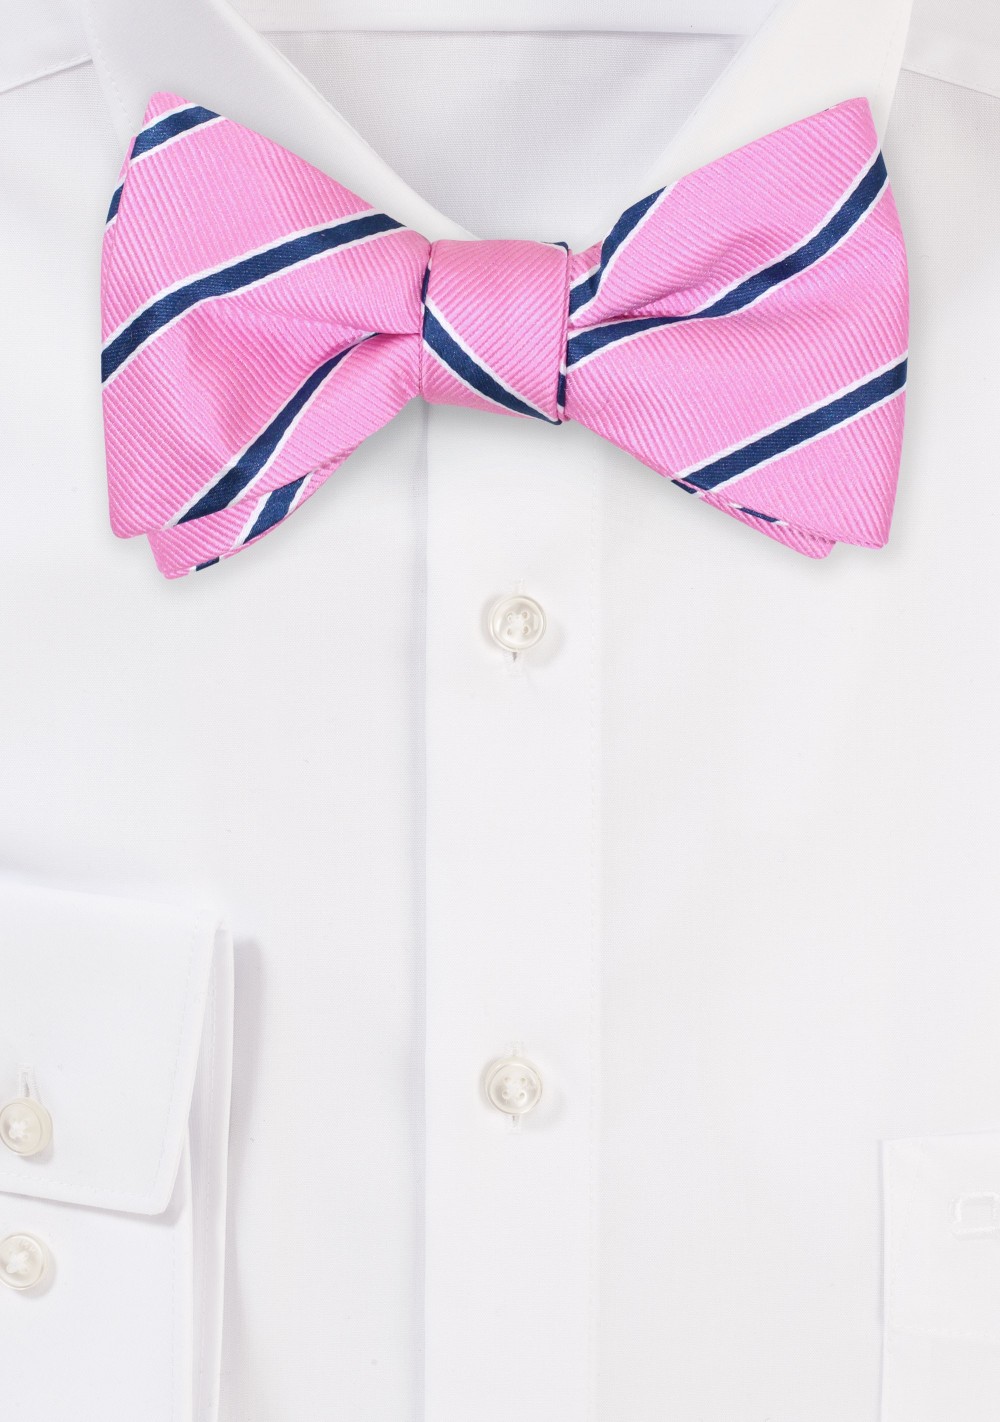 Repp Stripe Bow Tie in Pink and Navy